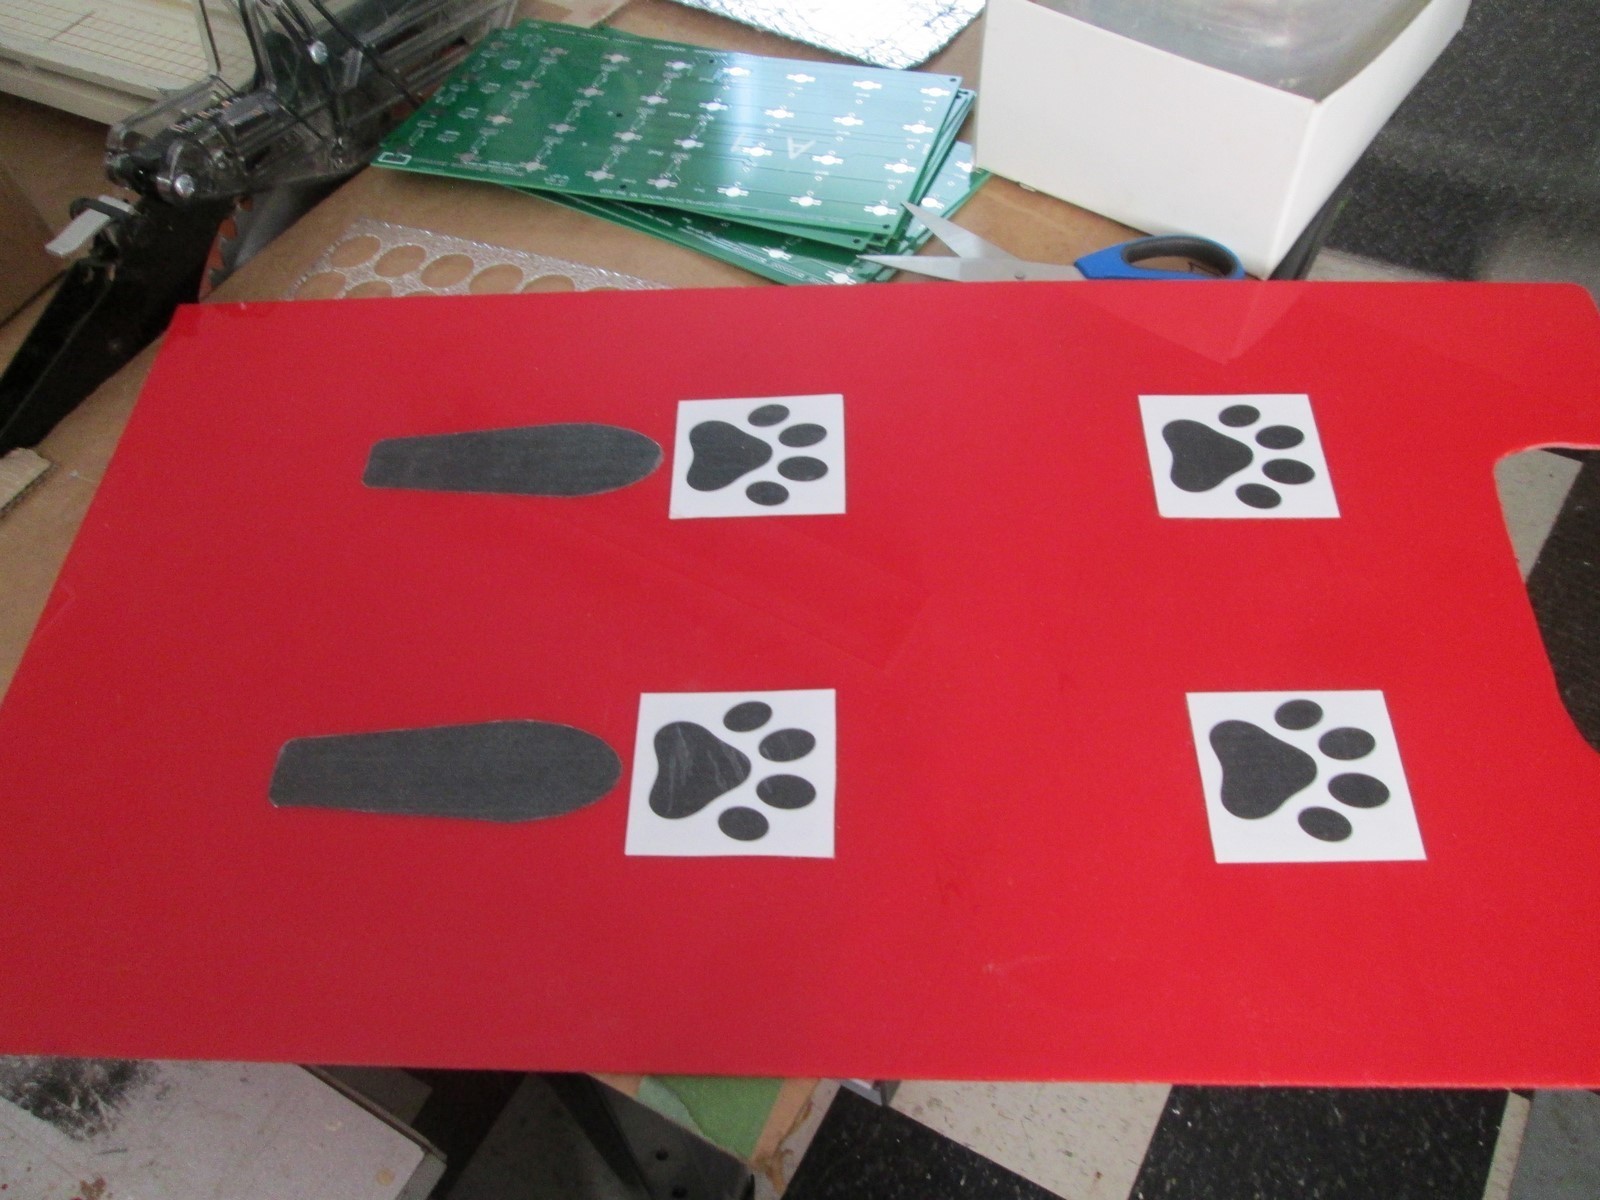 I got the red plastic acrylic for the back, from a scale I made for the dog.  (Plastic was too slippery for her).